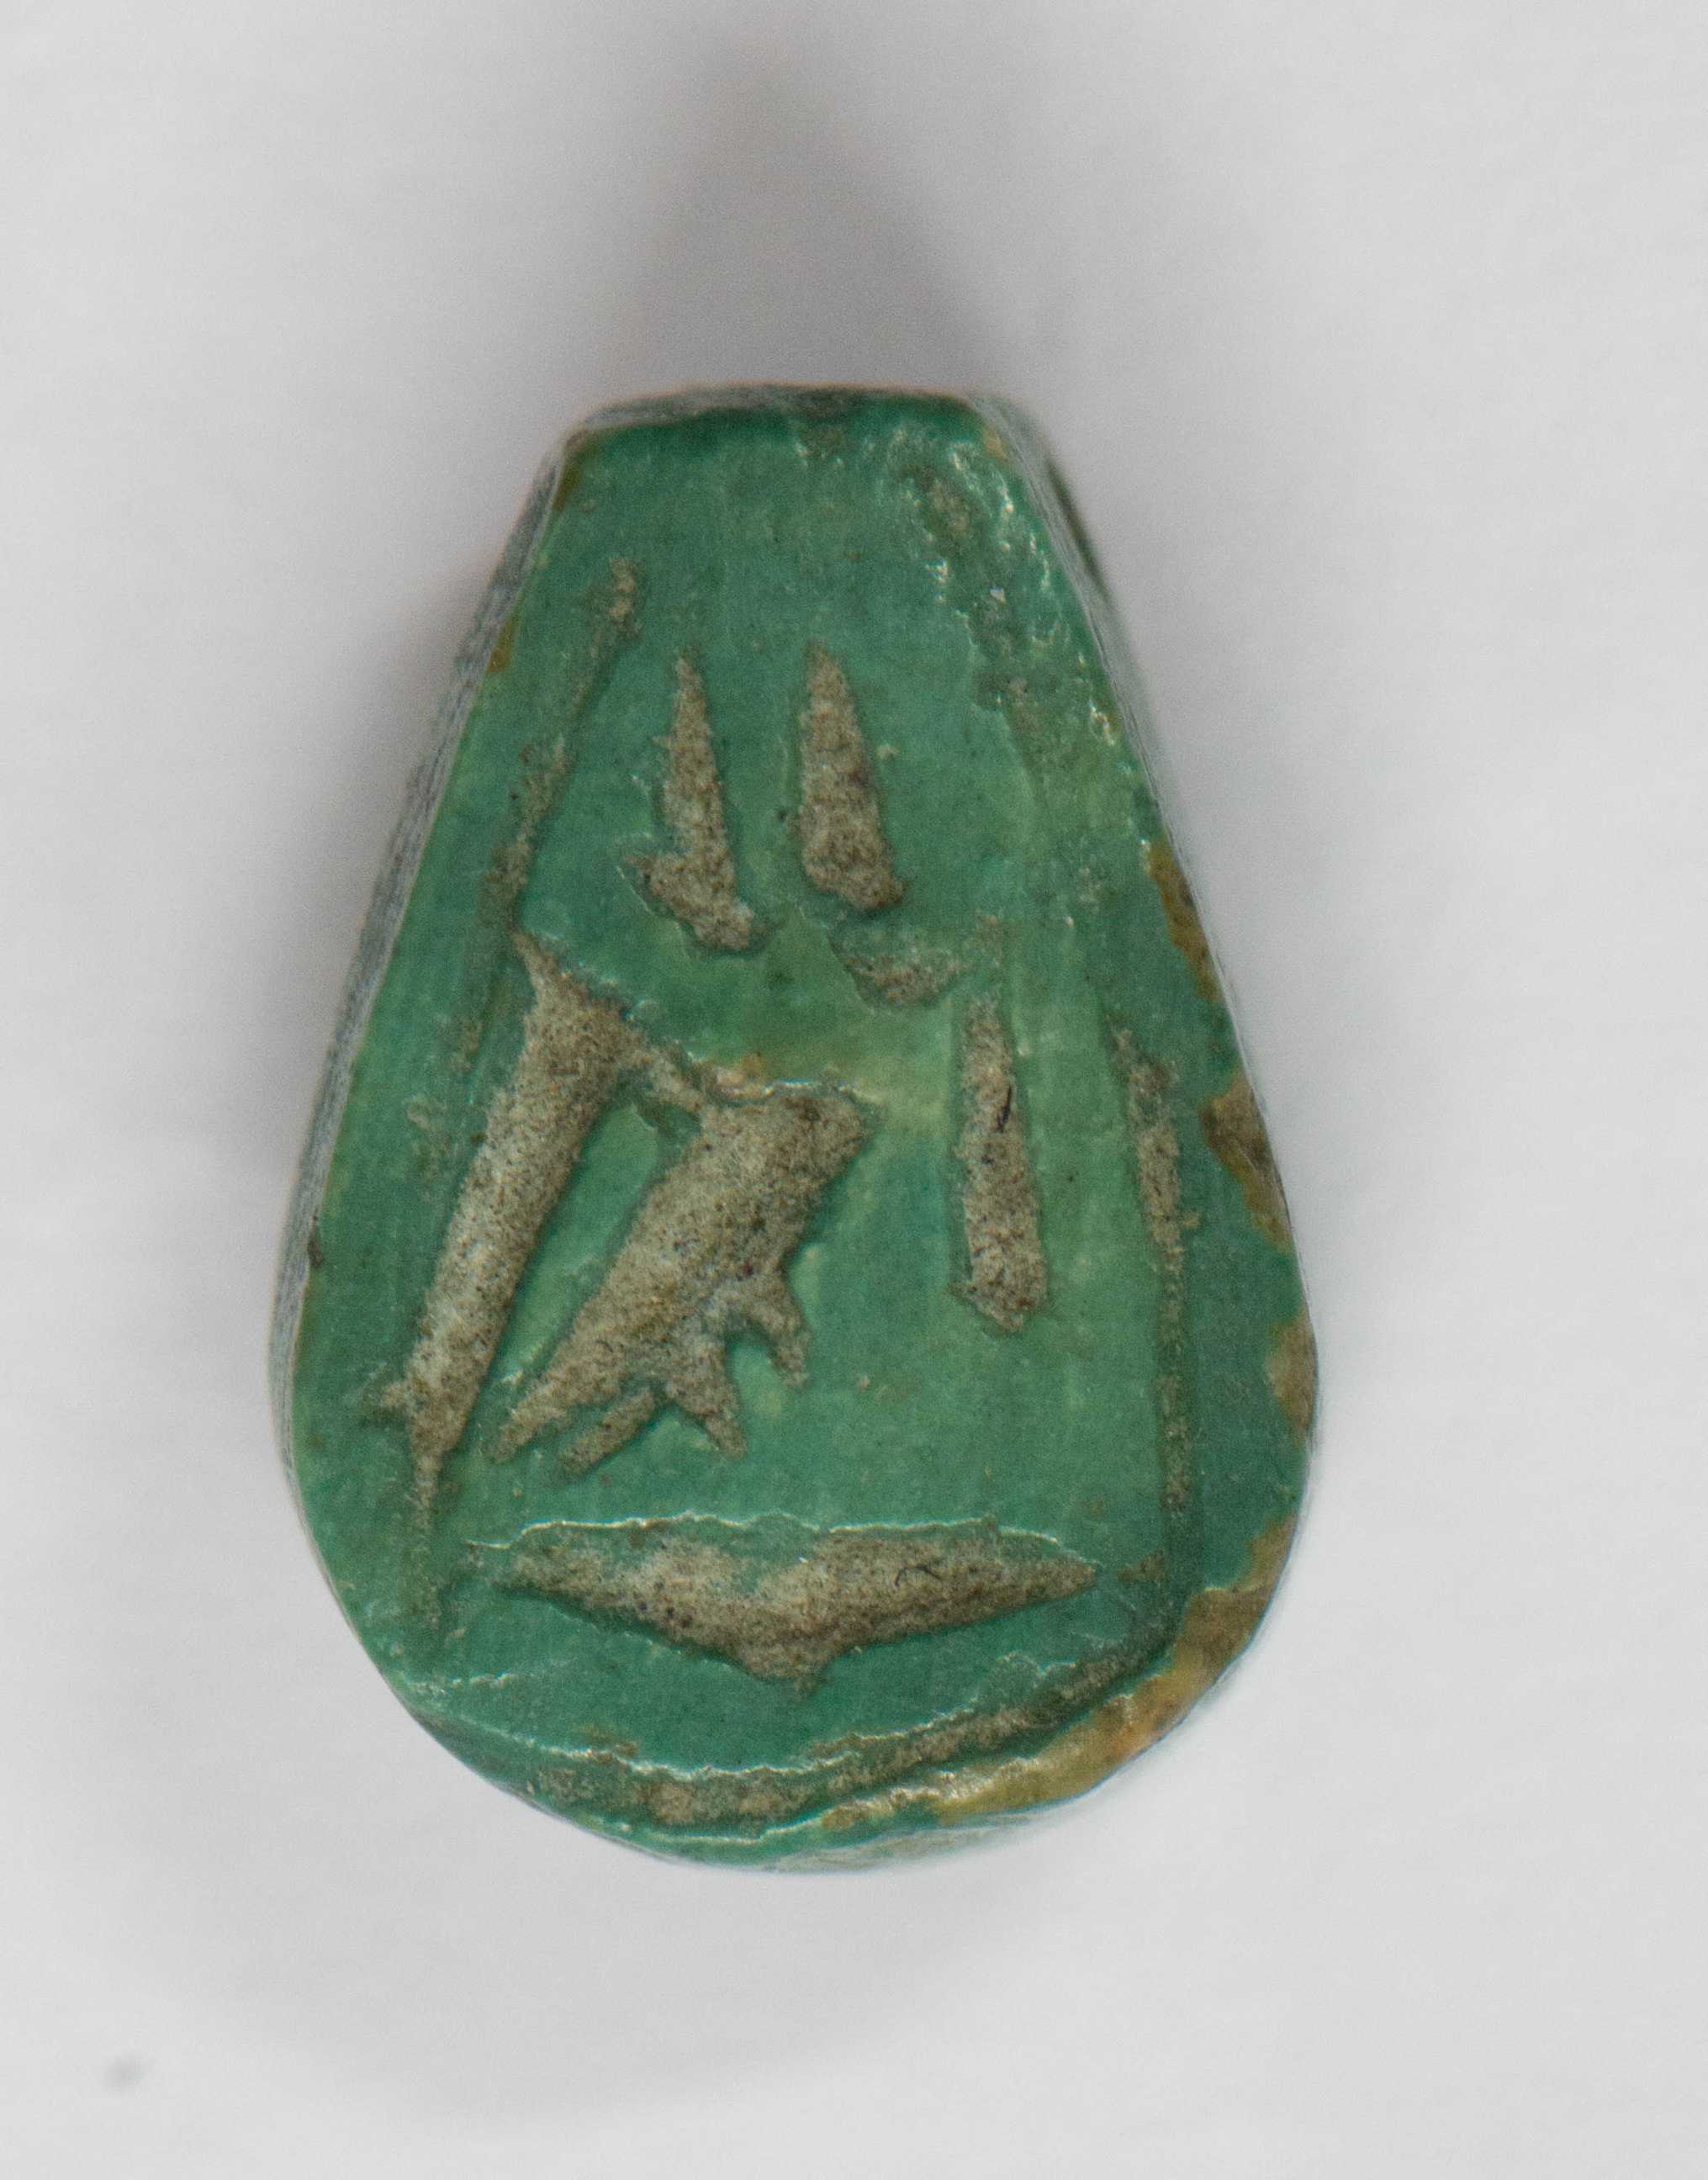 Image for: Copy of an amulet